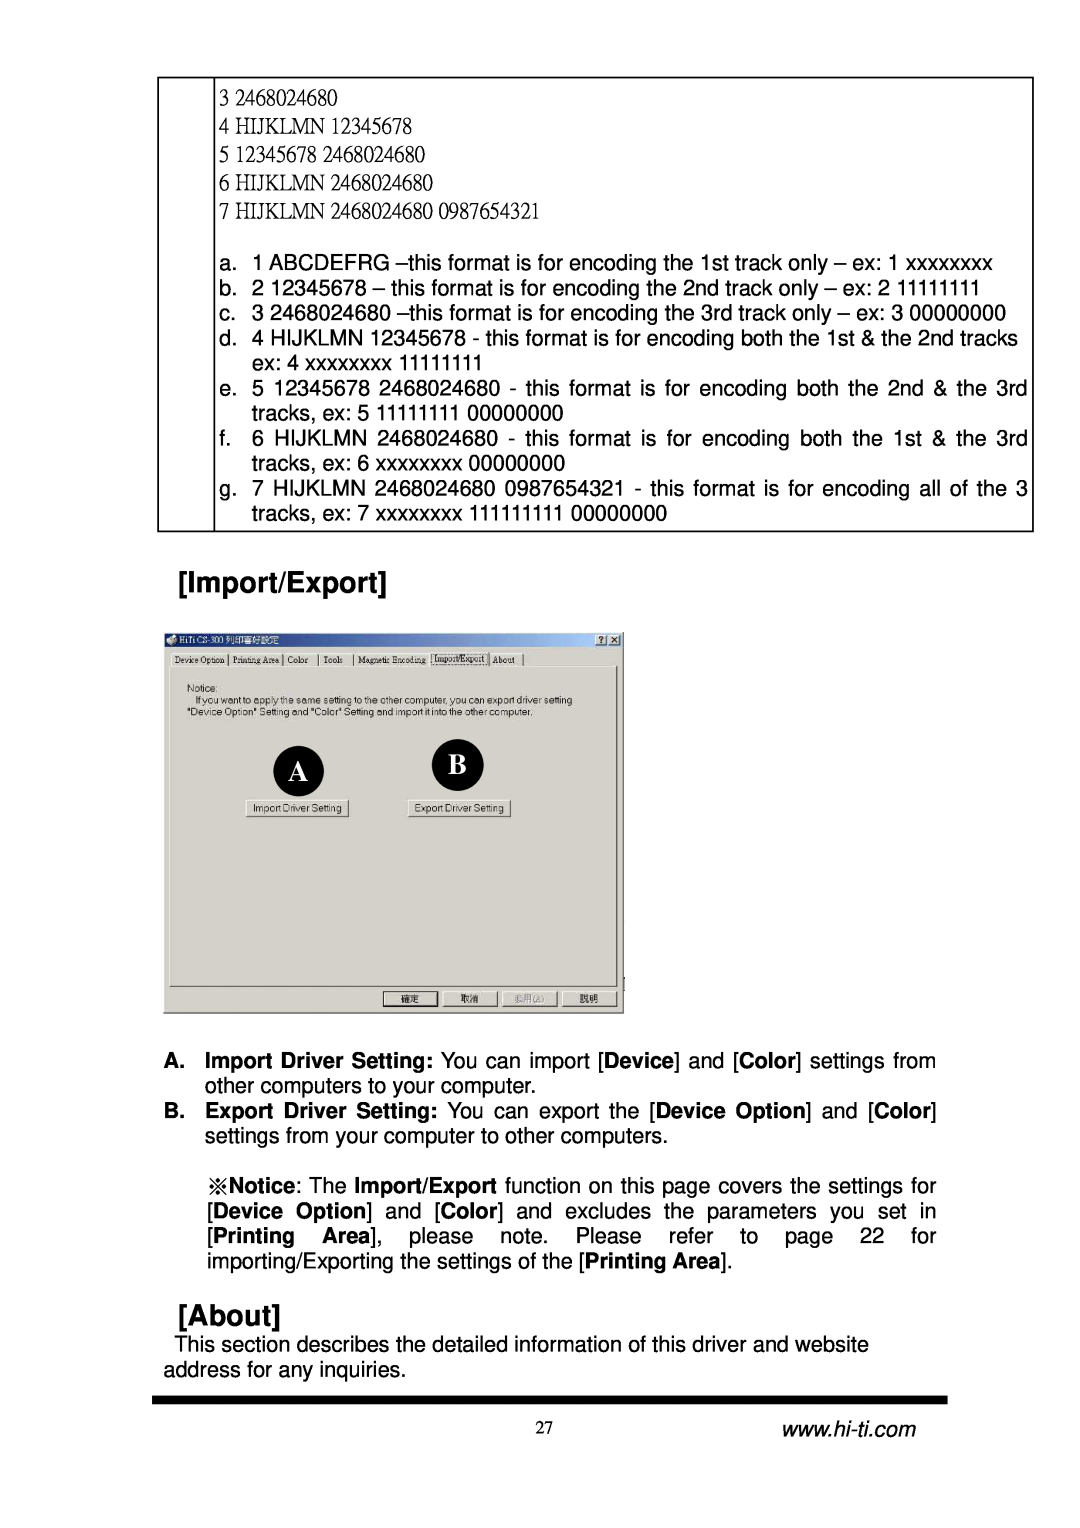 Hi-Touch Imaging Technologies CS-300 user manual Import/Export, About 